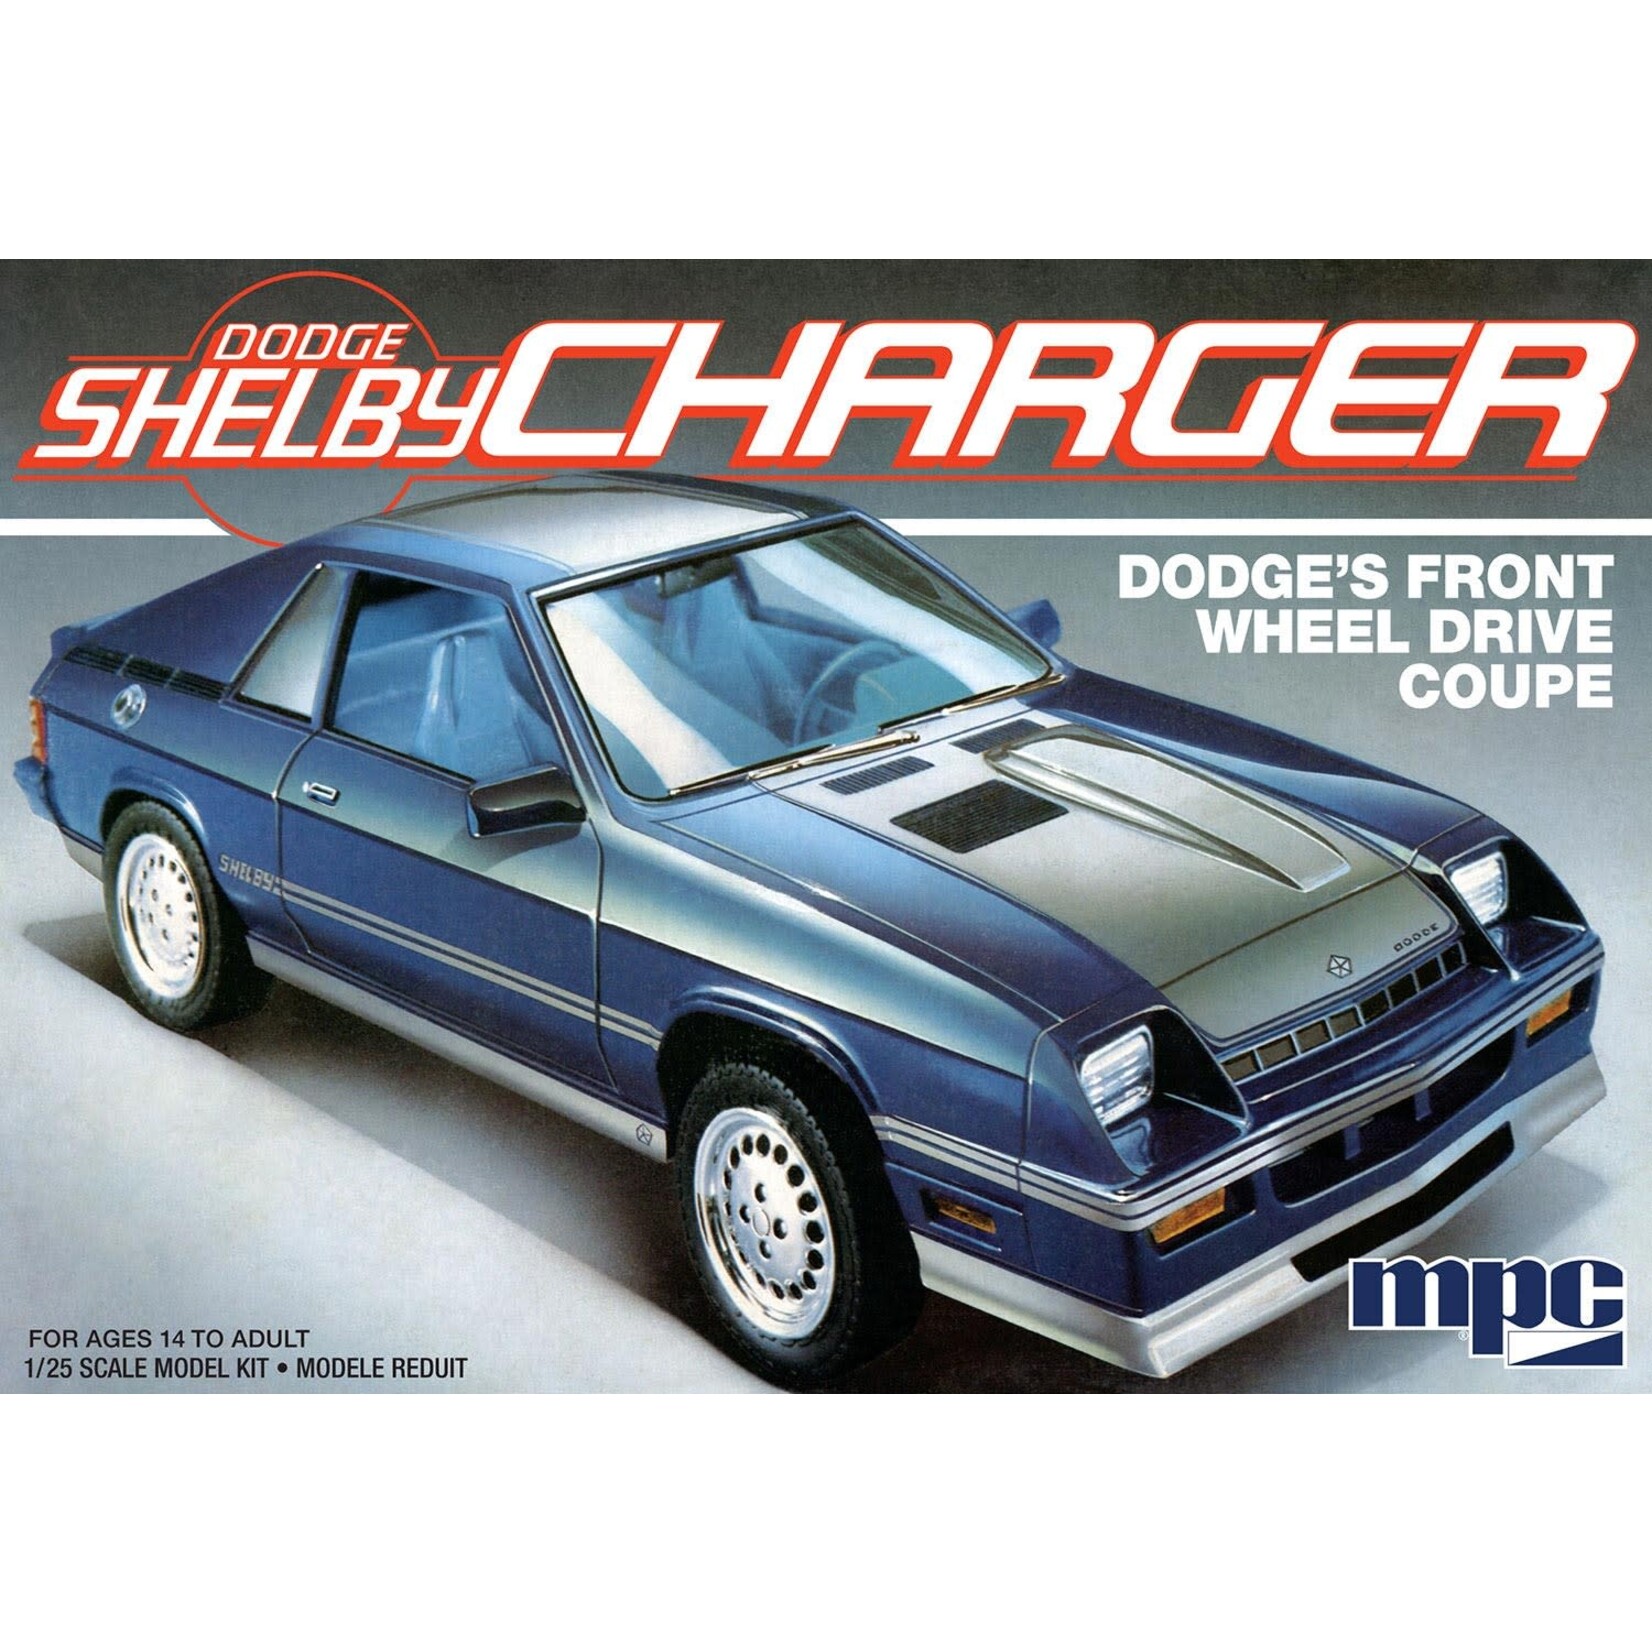 MPC Models 1/25 1986 Dodge Shelby Charger Kit